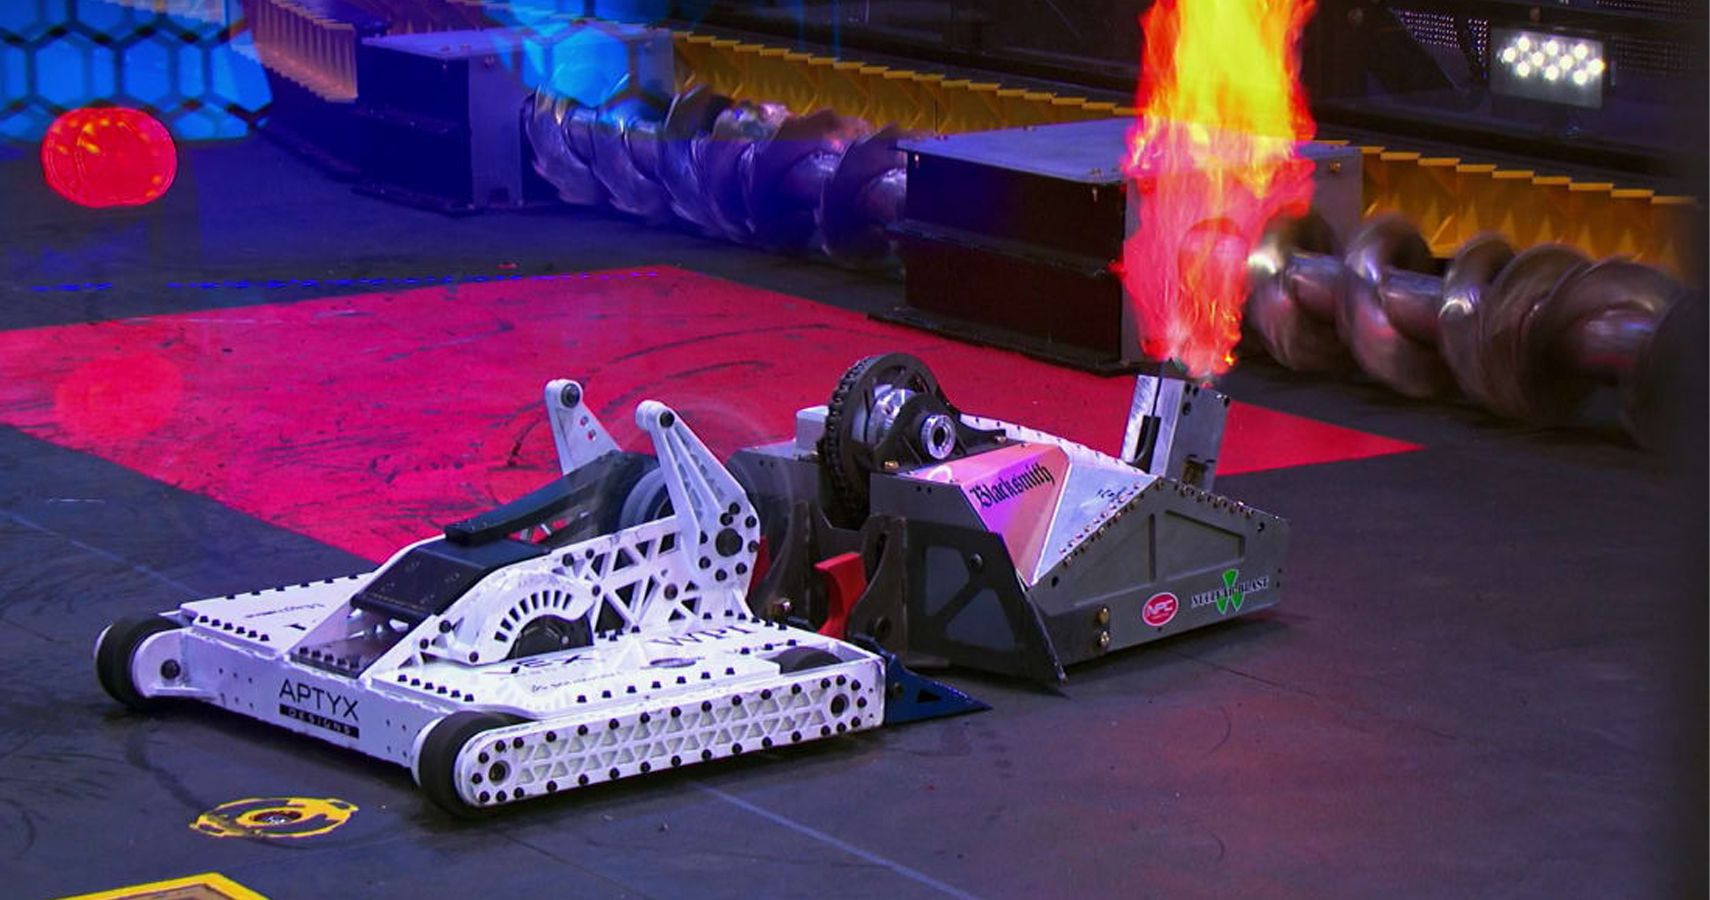 Battlebots 5 Of The Best Bots In The Competition (And 5 That Have Had